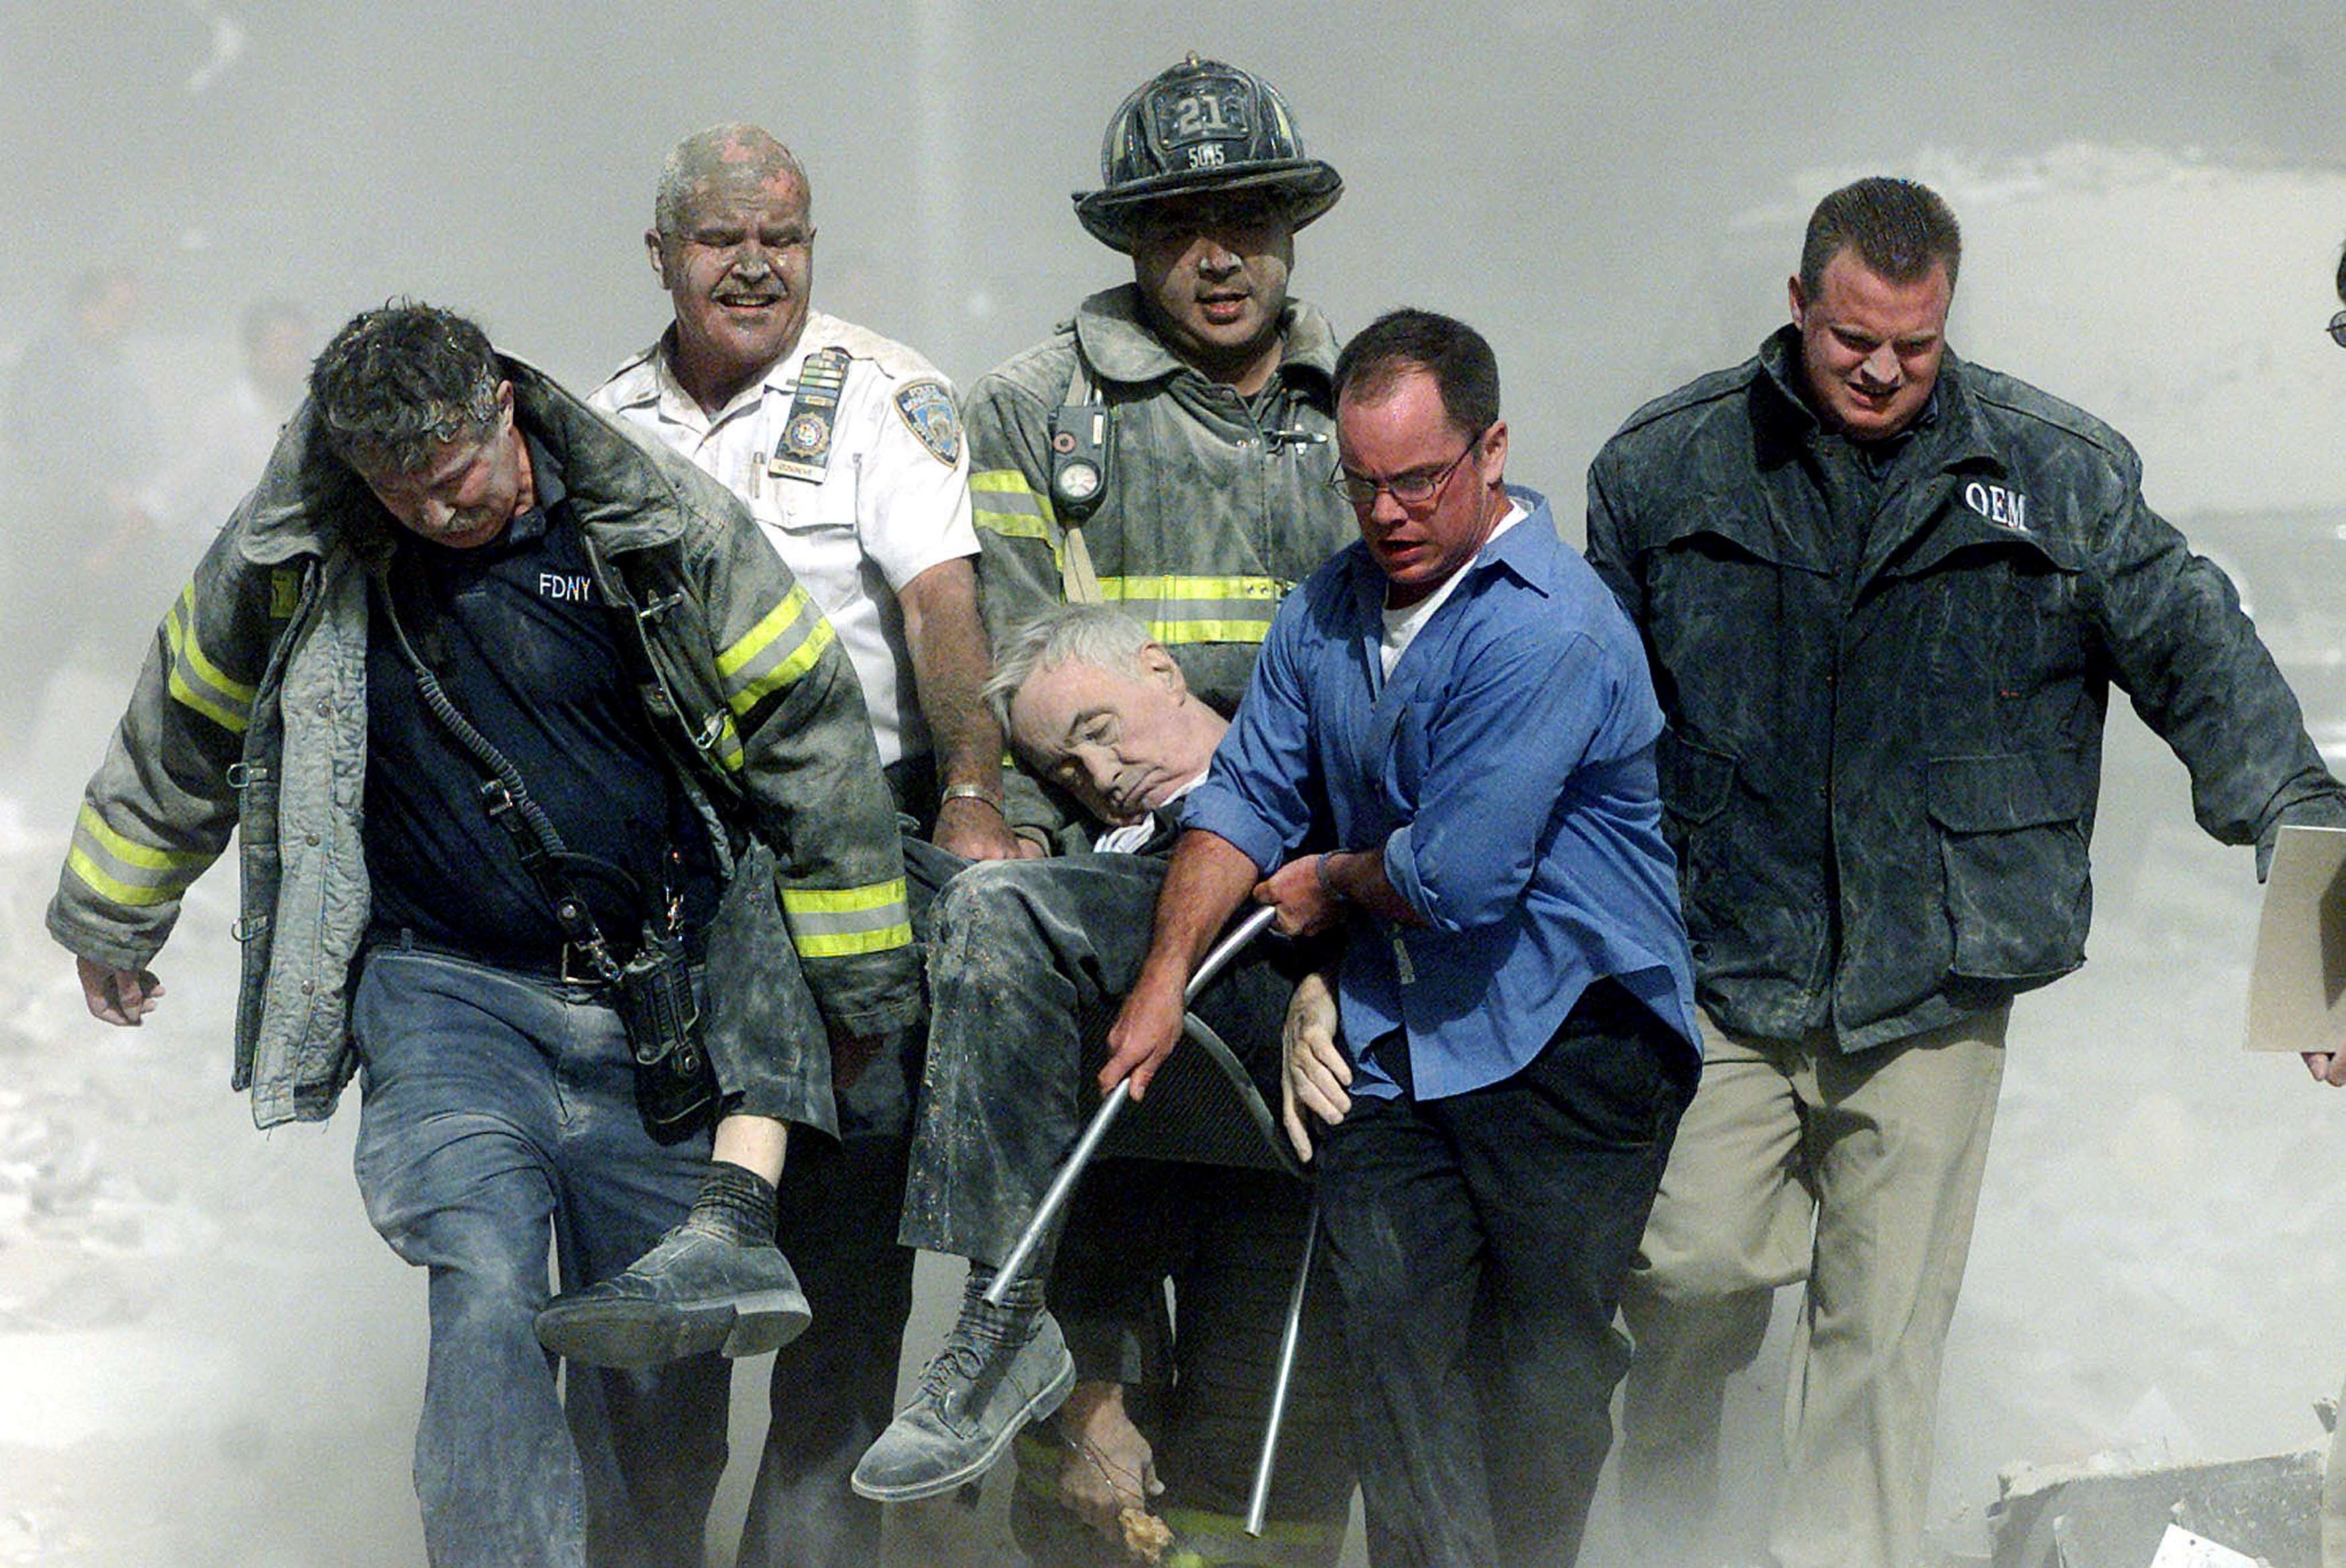 Rescue Workers Carry Fatally Injured New York City Fire Department Chaplain Fether Mychal Judge